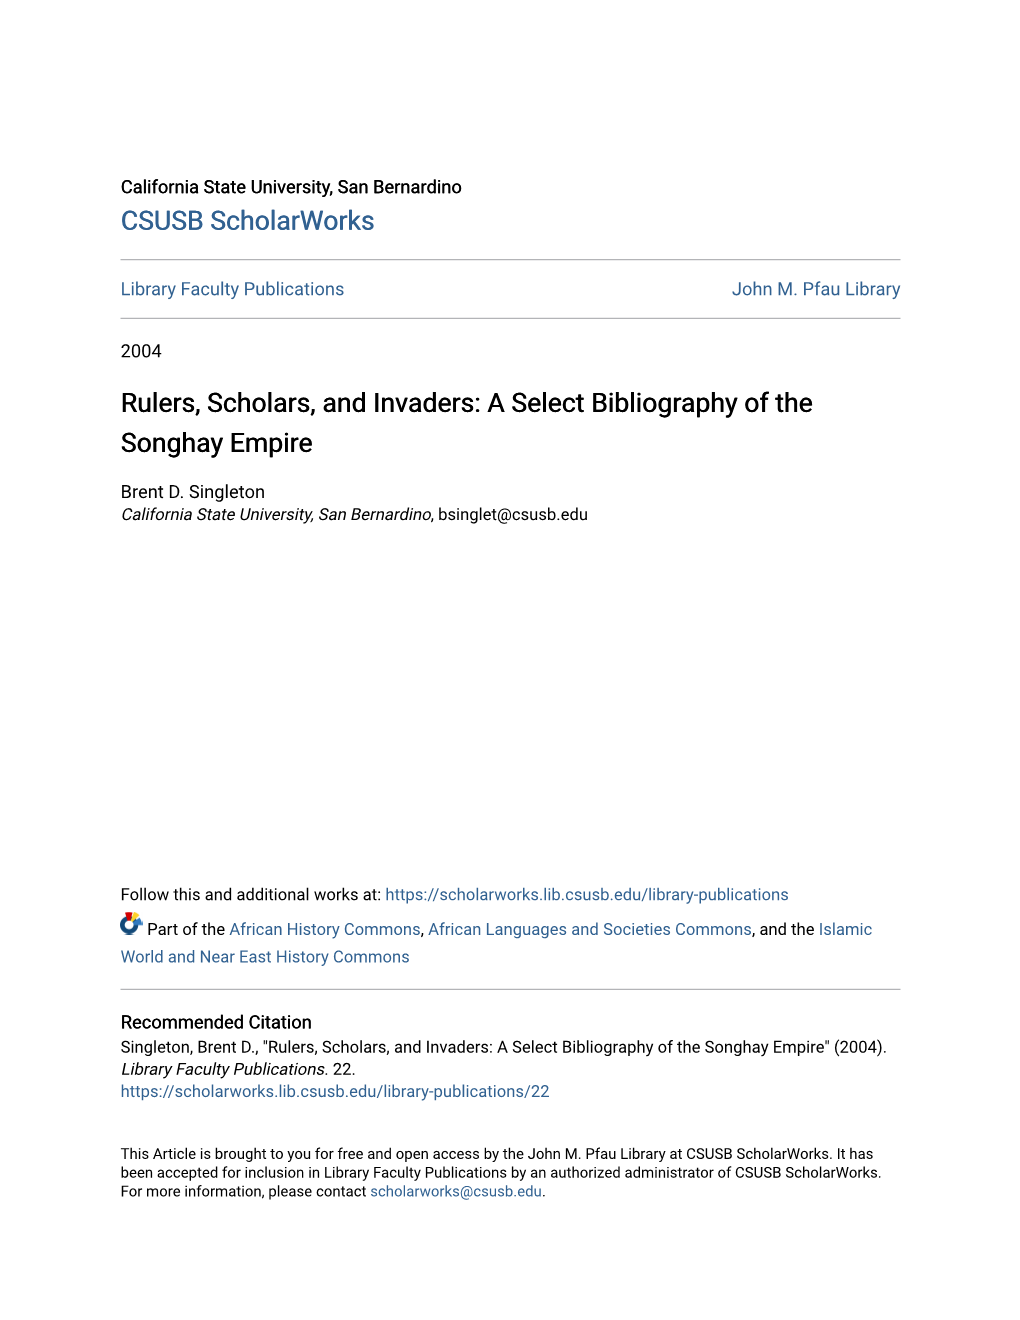 A Select Bibliography of the Songhay Empire